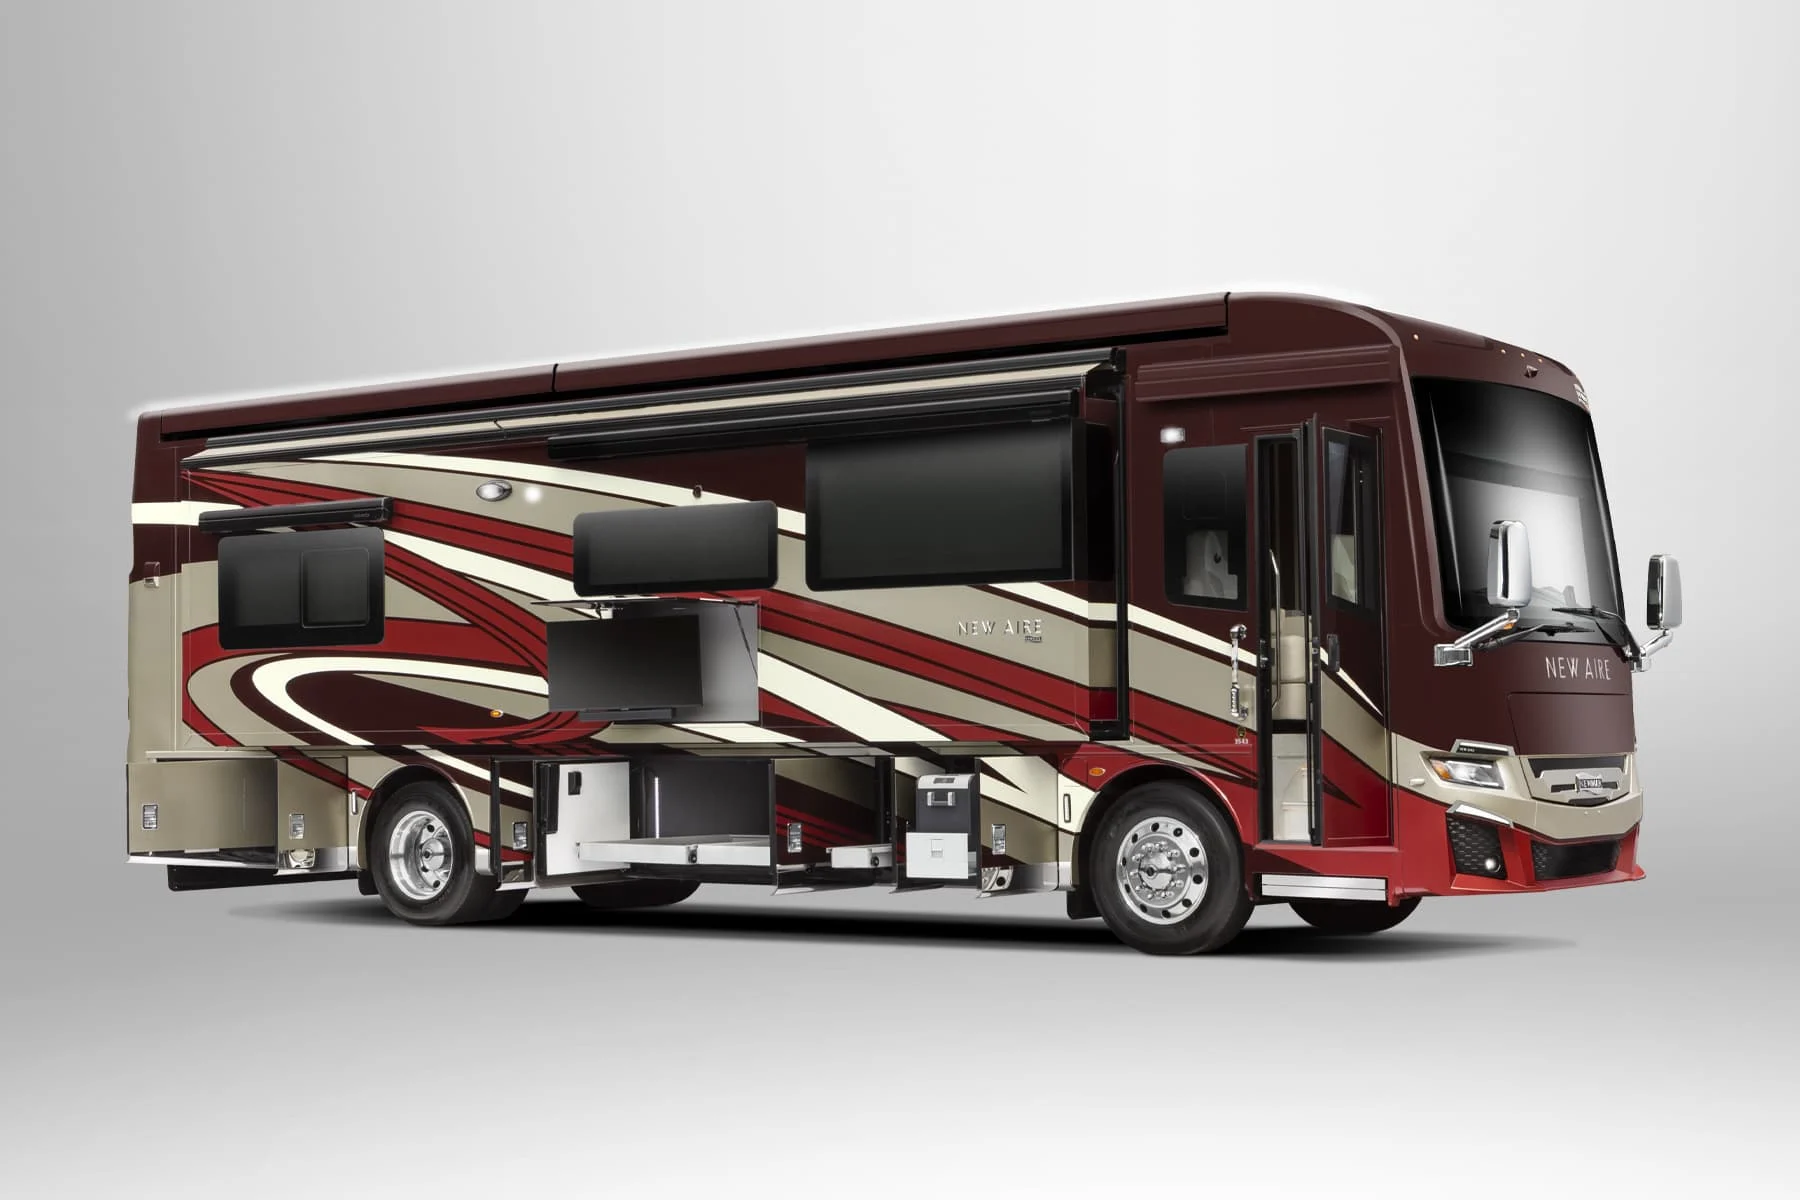 Photo of a Newmar New Aire which is a smaller Class A motorhome